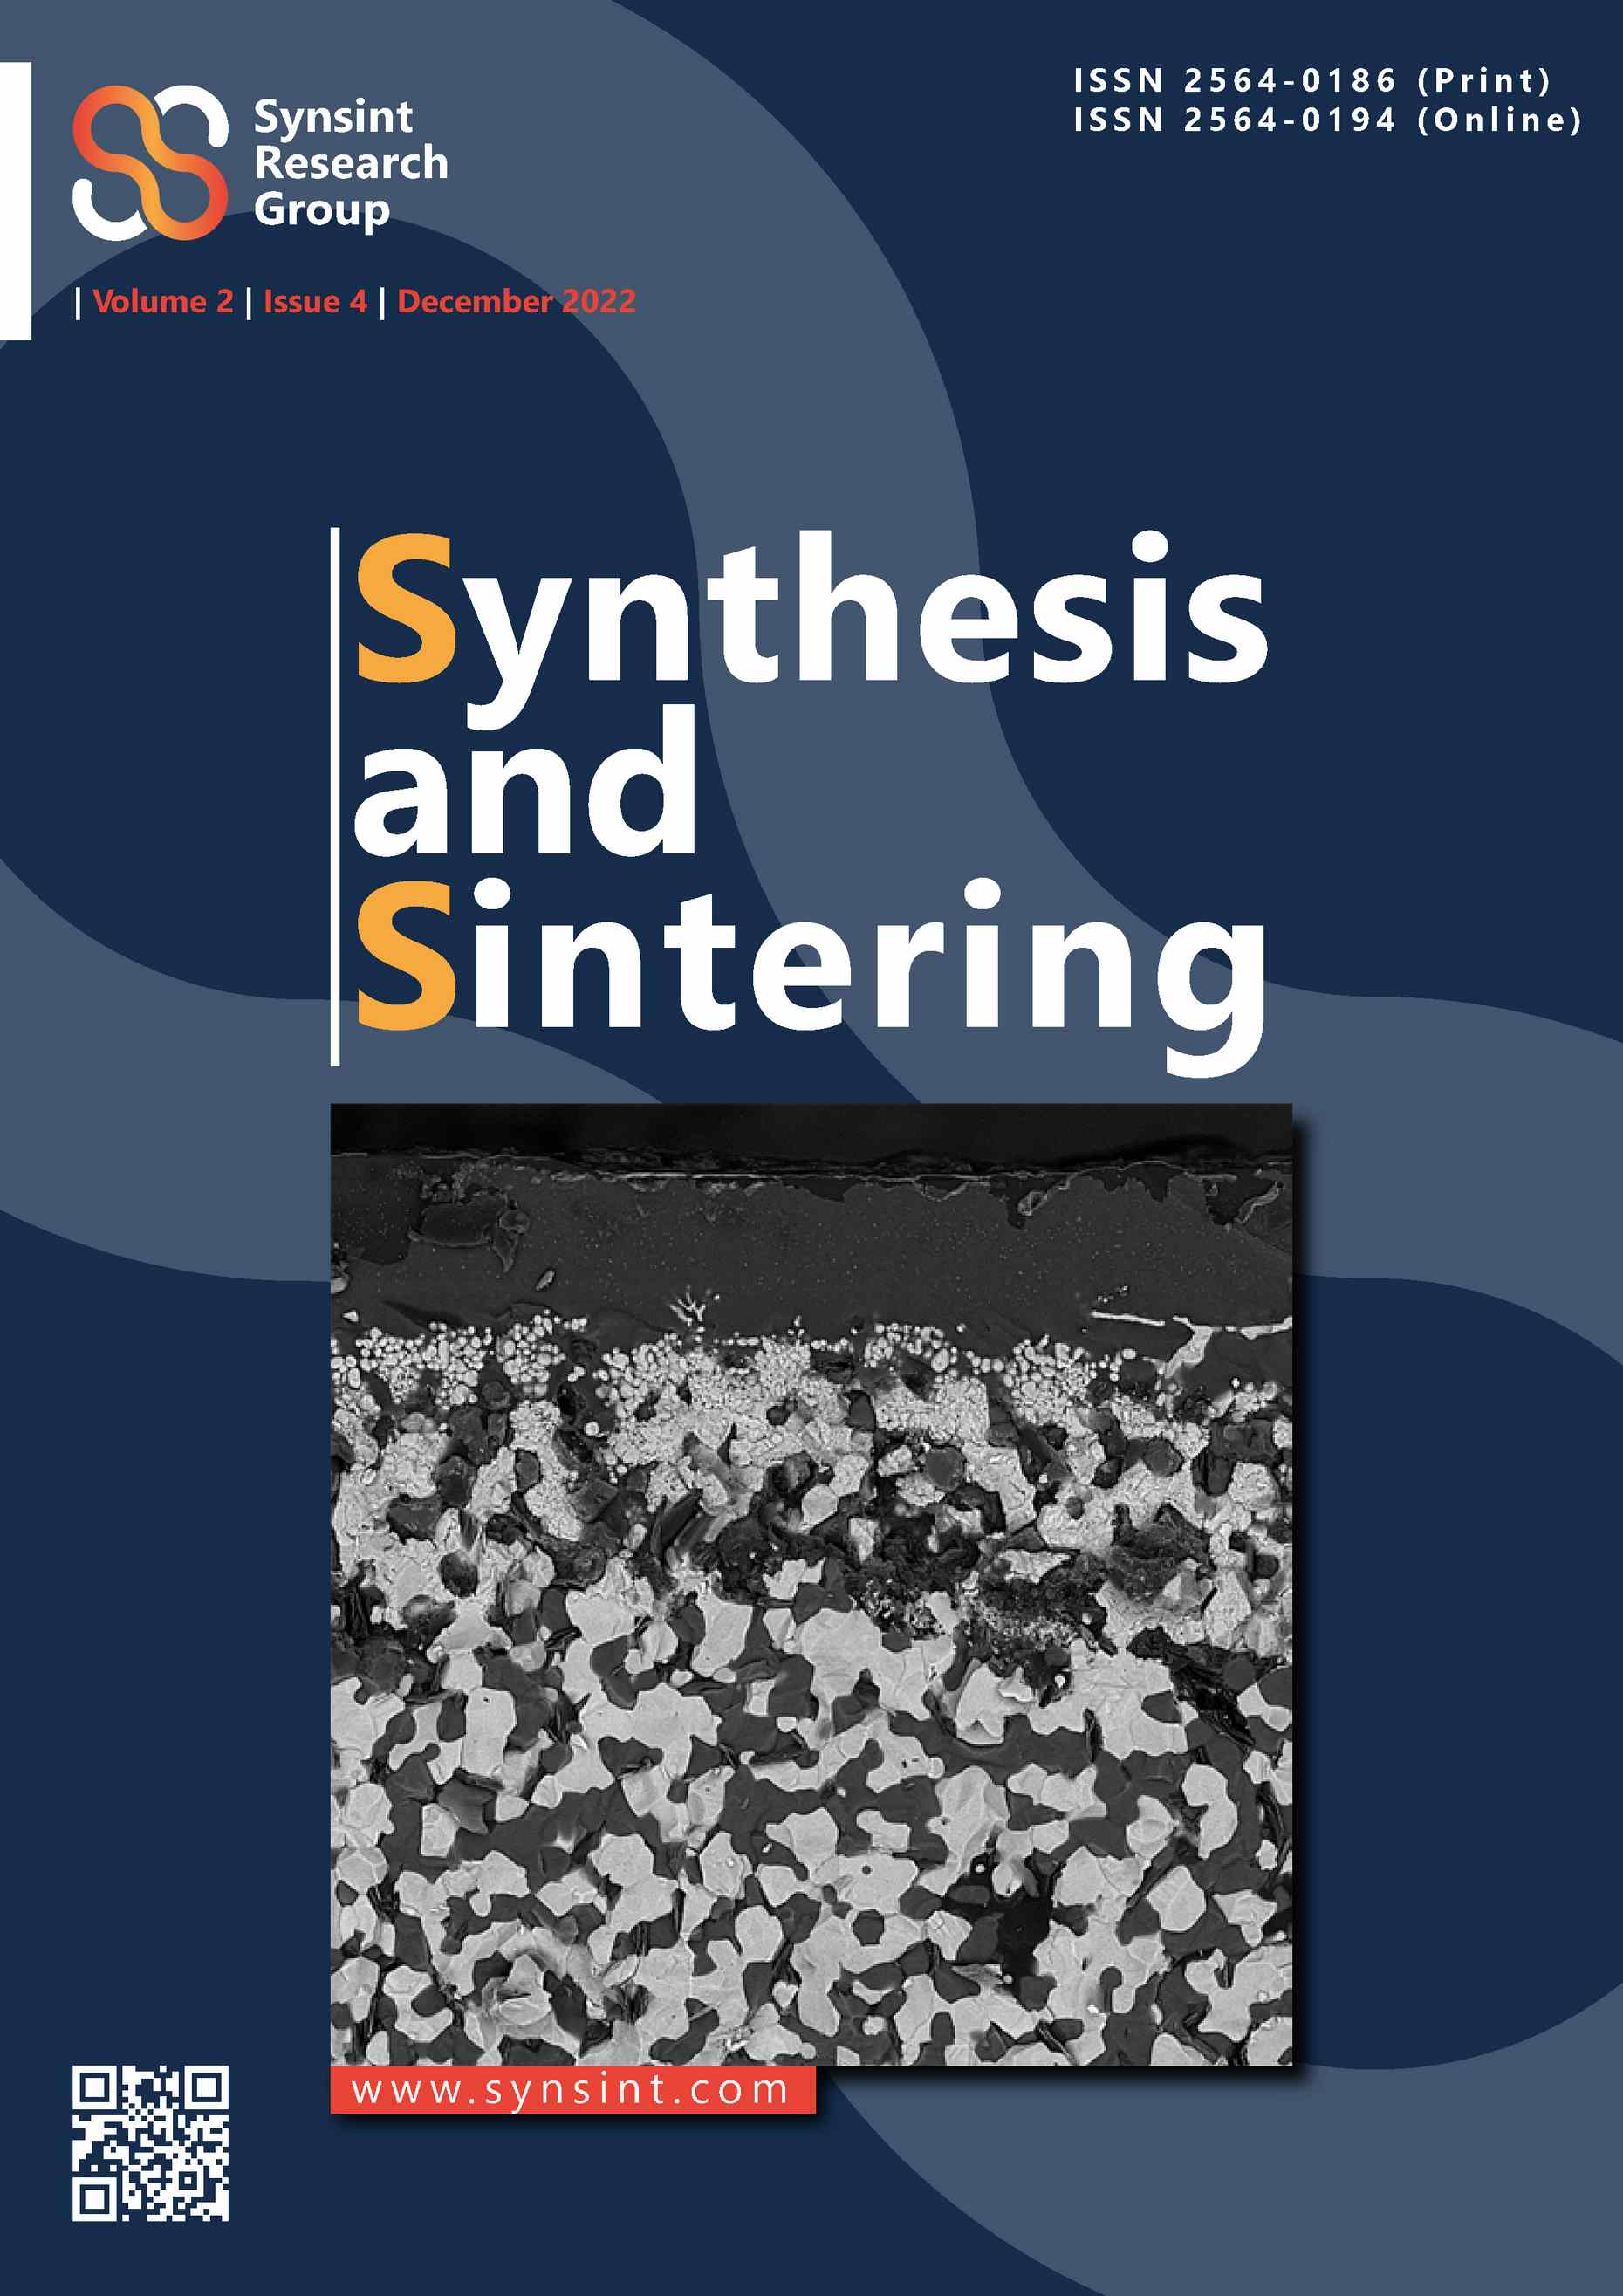 Synthesis and Sintering Vol. 2 No. 4 (2022)